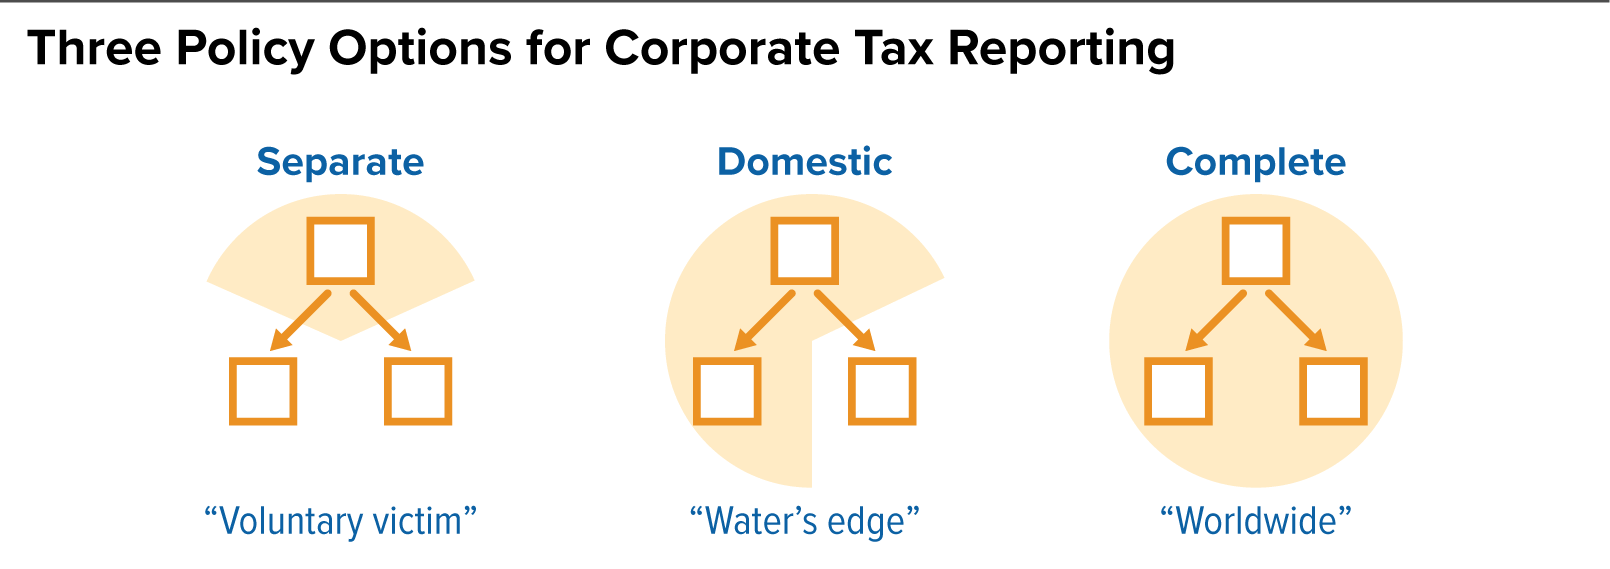 Three Policy Options for Corporate Tax Reporting